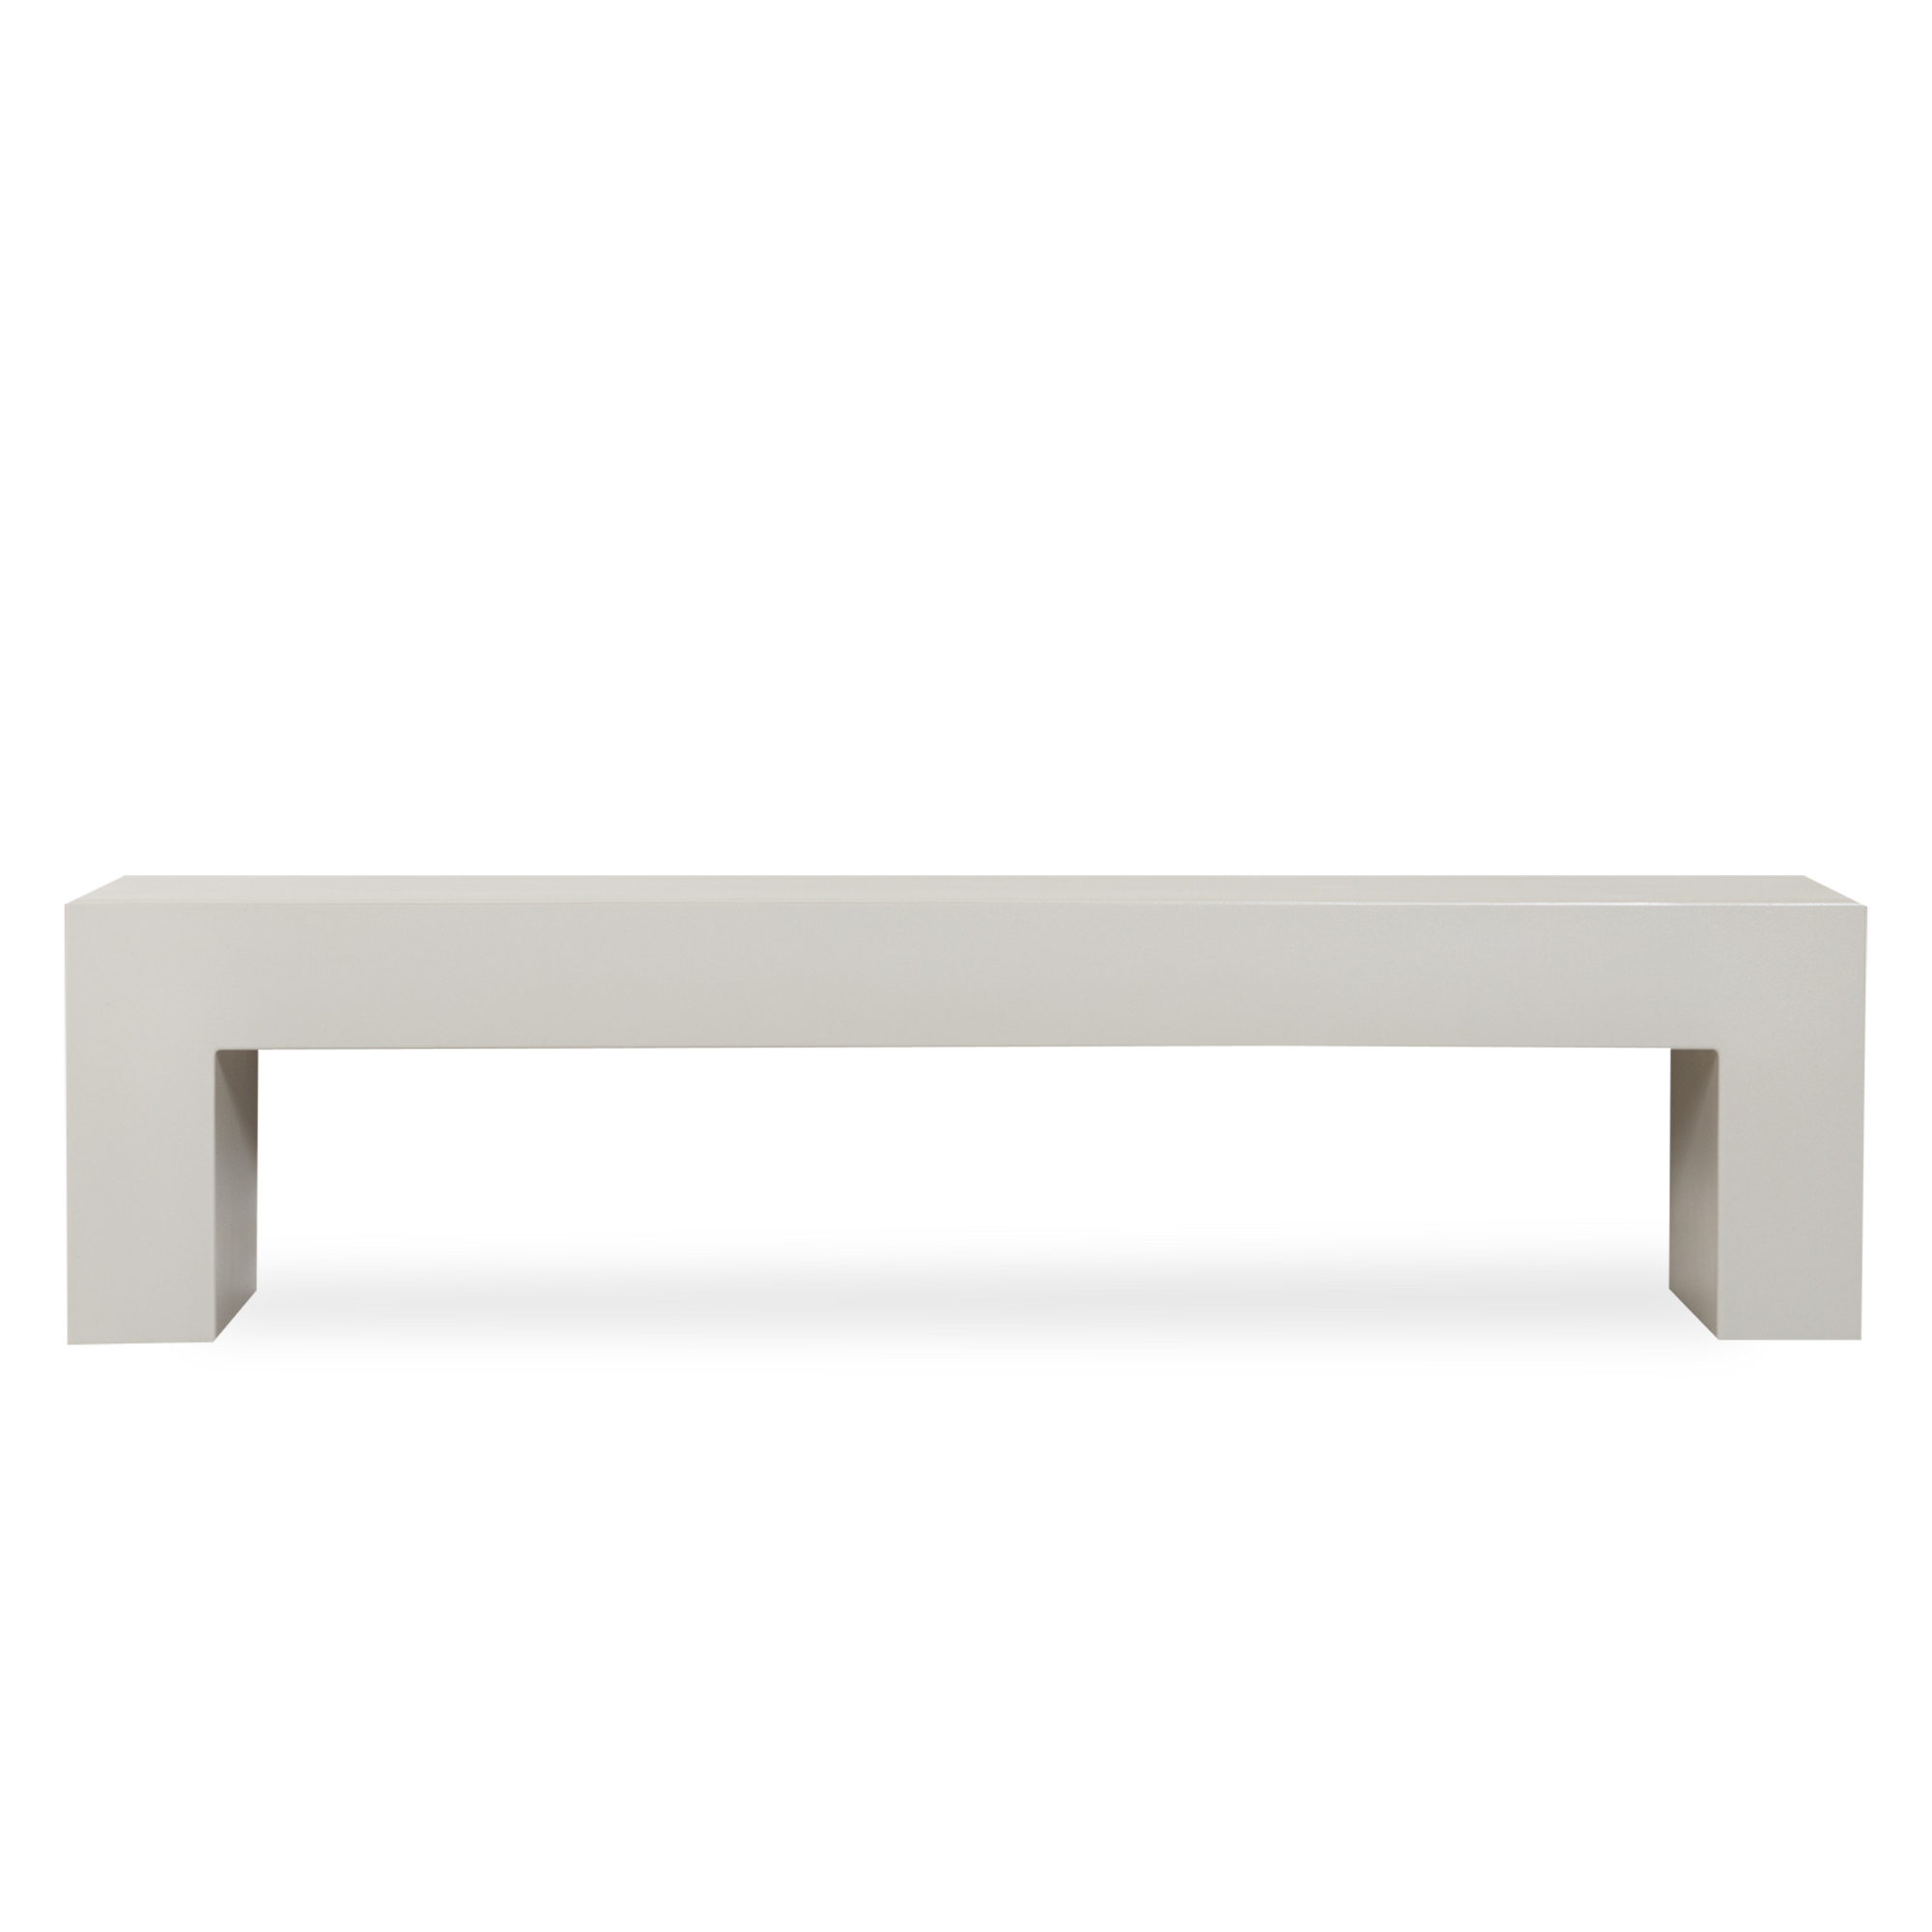 Designed by the famous Italian design duo Lella and Massimo Vignelli, the Vignelli Large Bench was inspired by the need for an aesthetically pleasing yet highly functional indoor-o